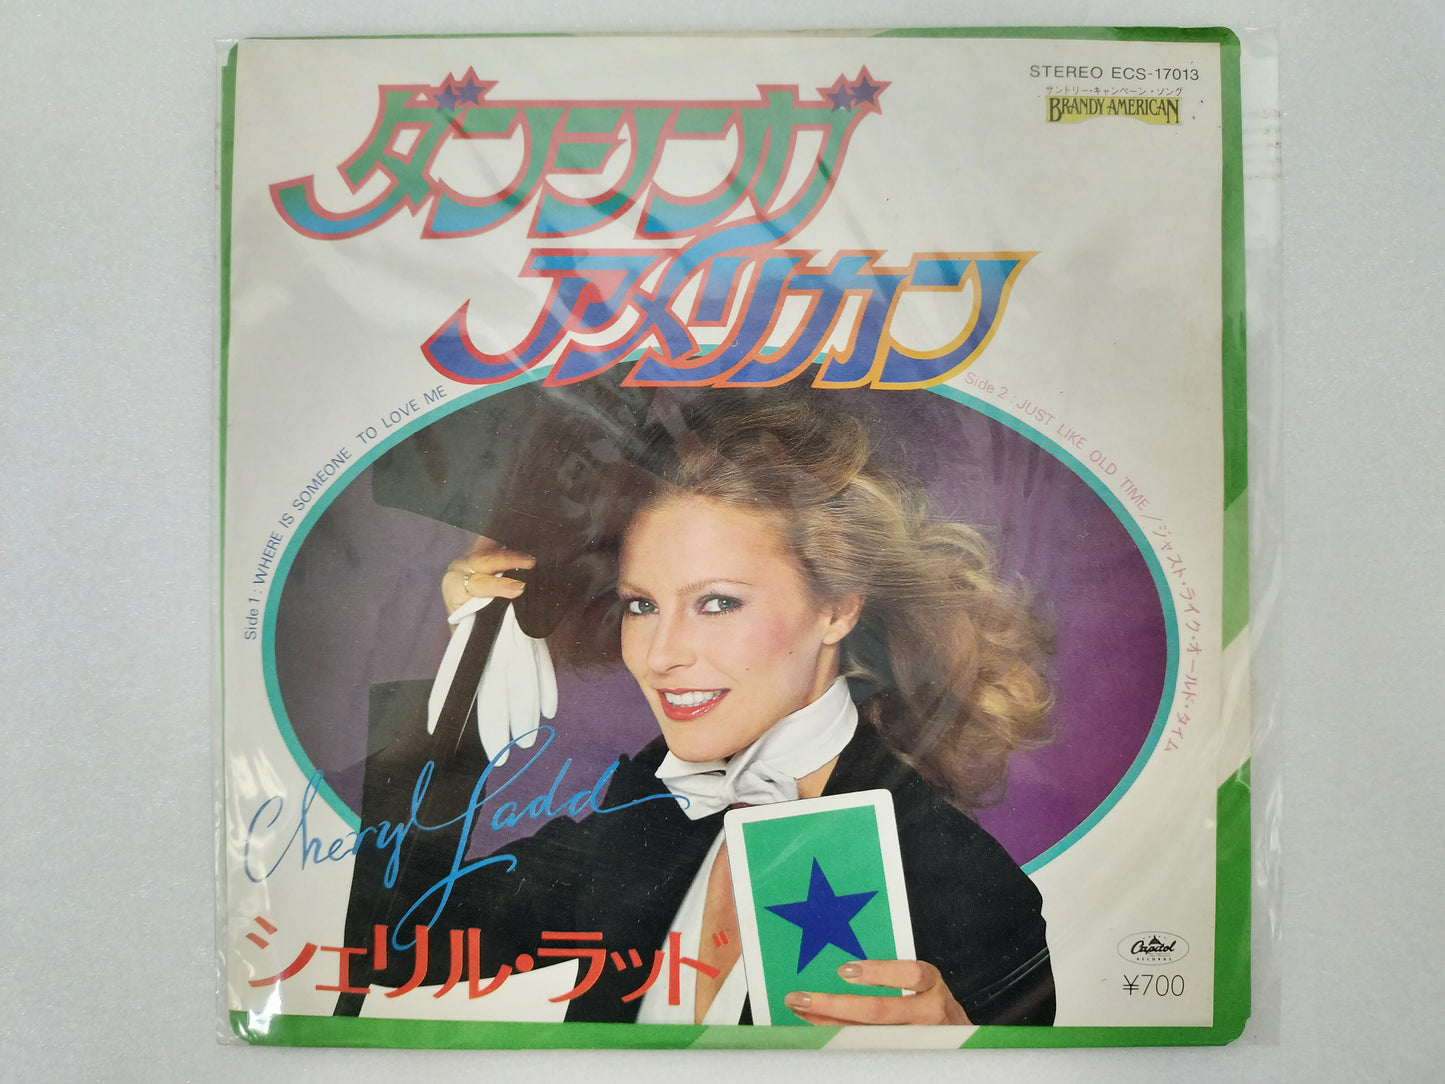 1980 Dancing American Cheryl Ladd B: Just Like Old Time Japanese record vintage